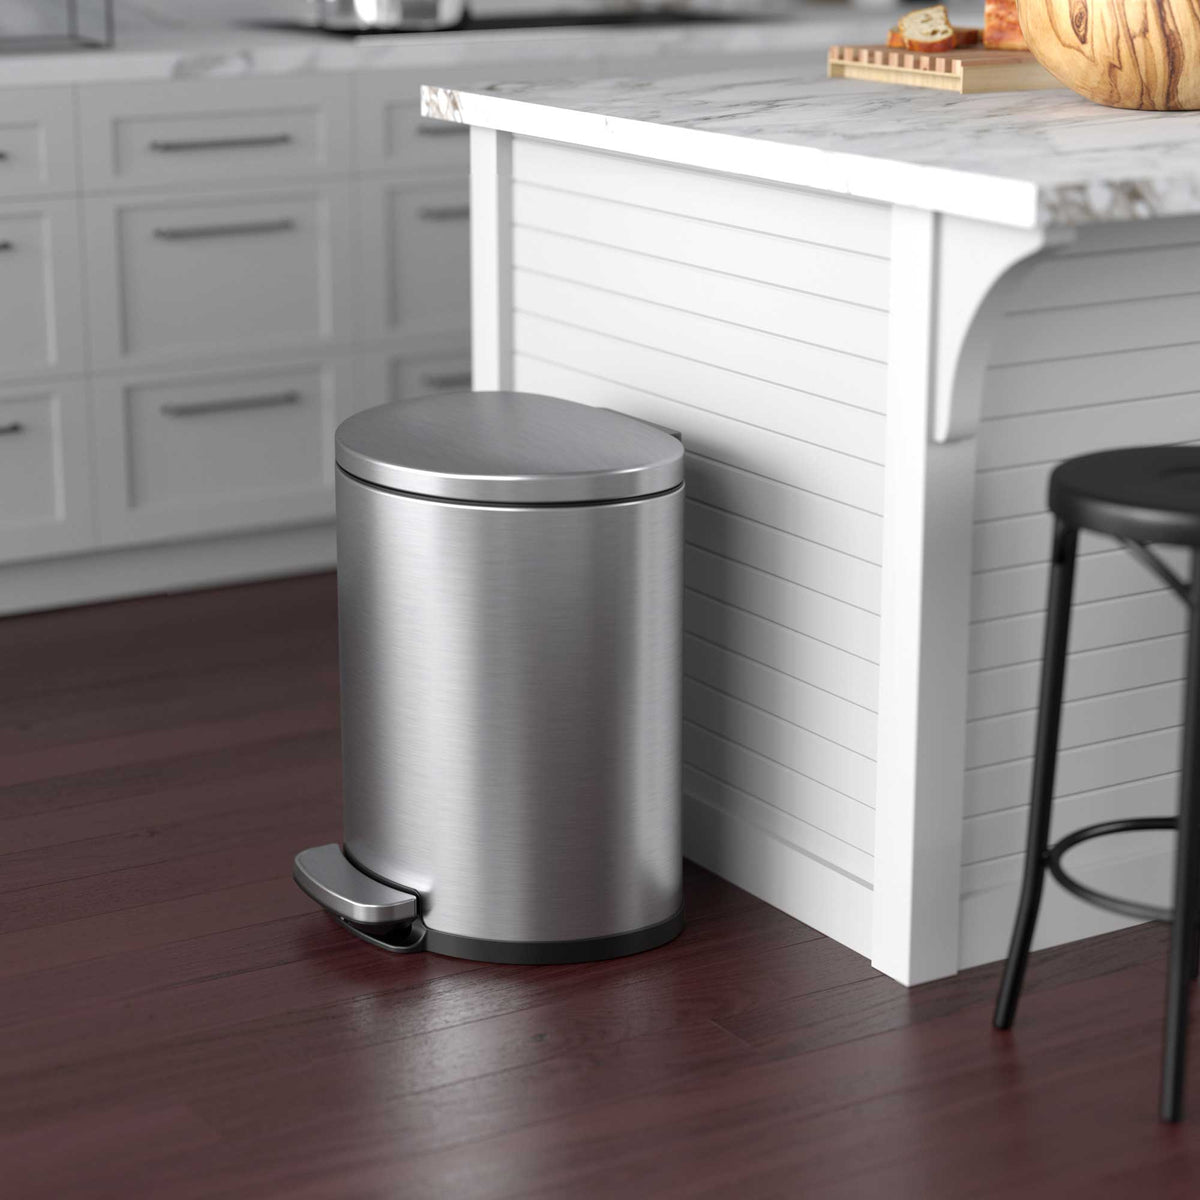 5 Gallon / 19 Liter SoftStep Semi-Round Step Pedal Trash Can in kitchen